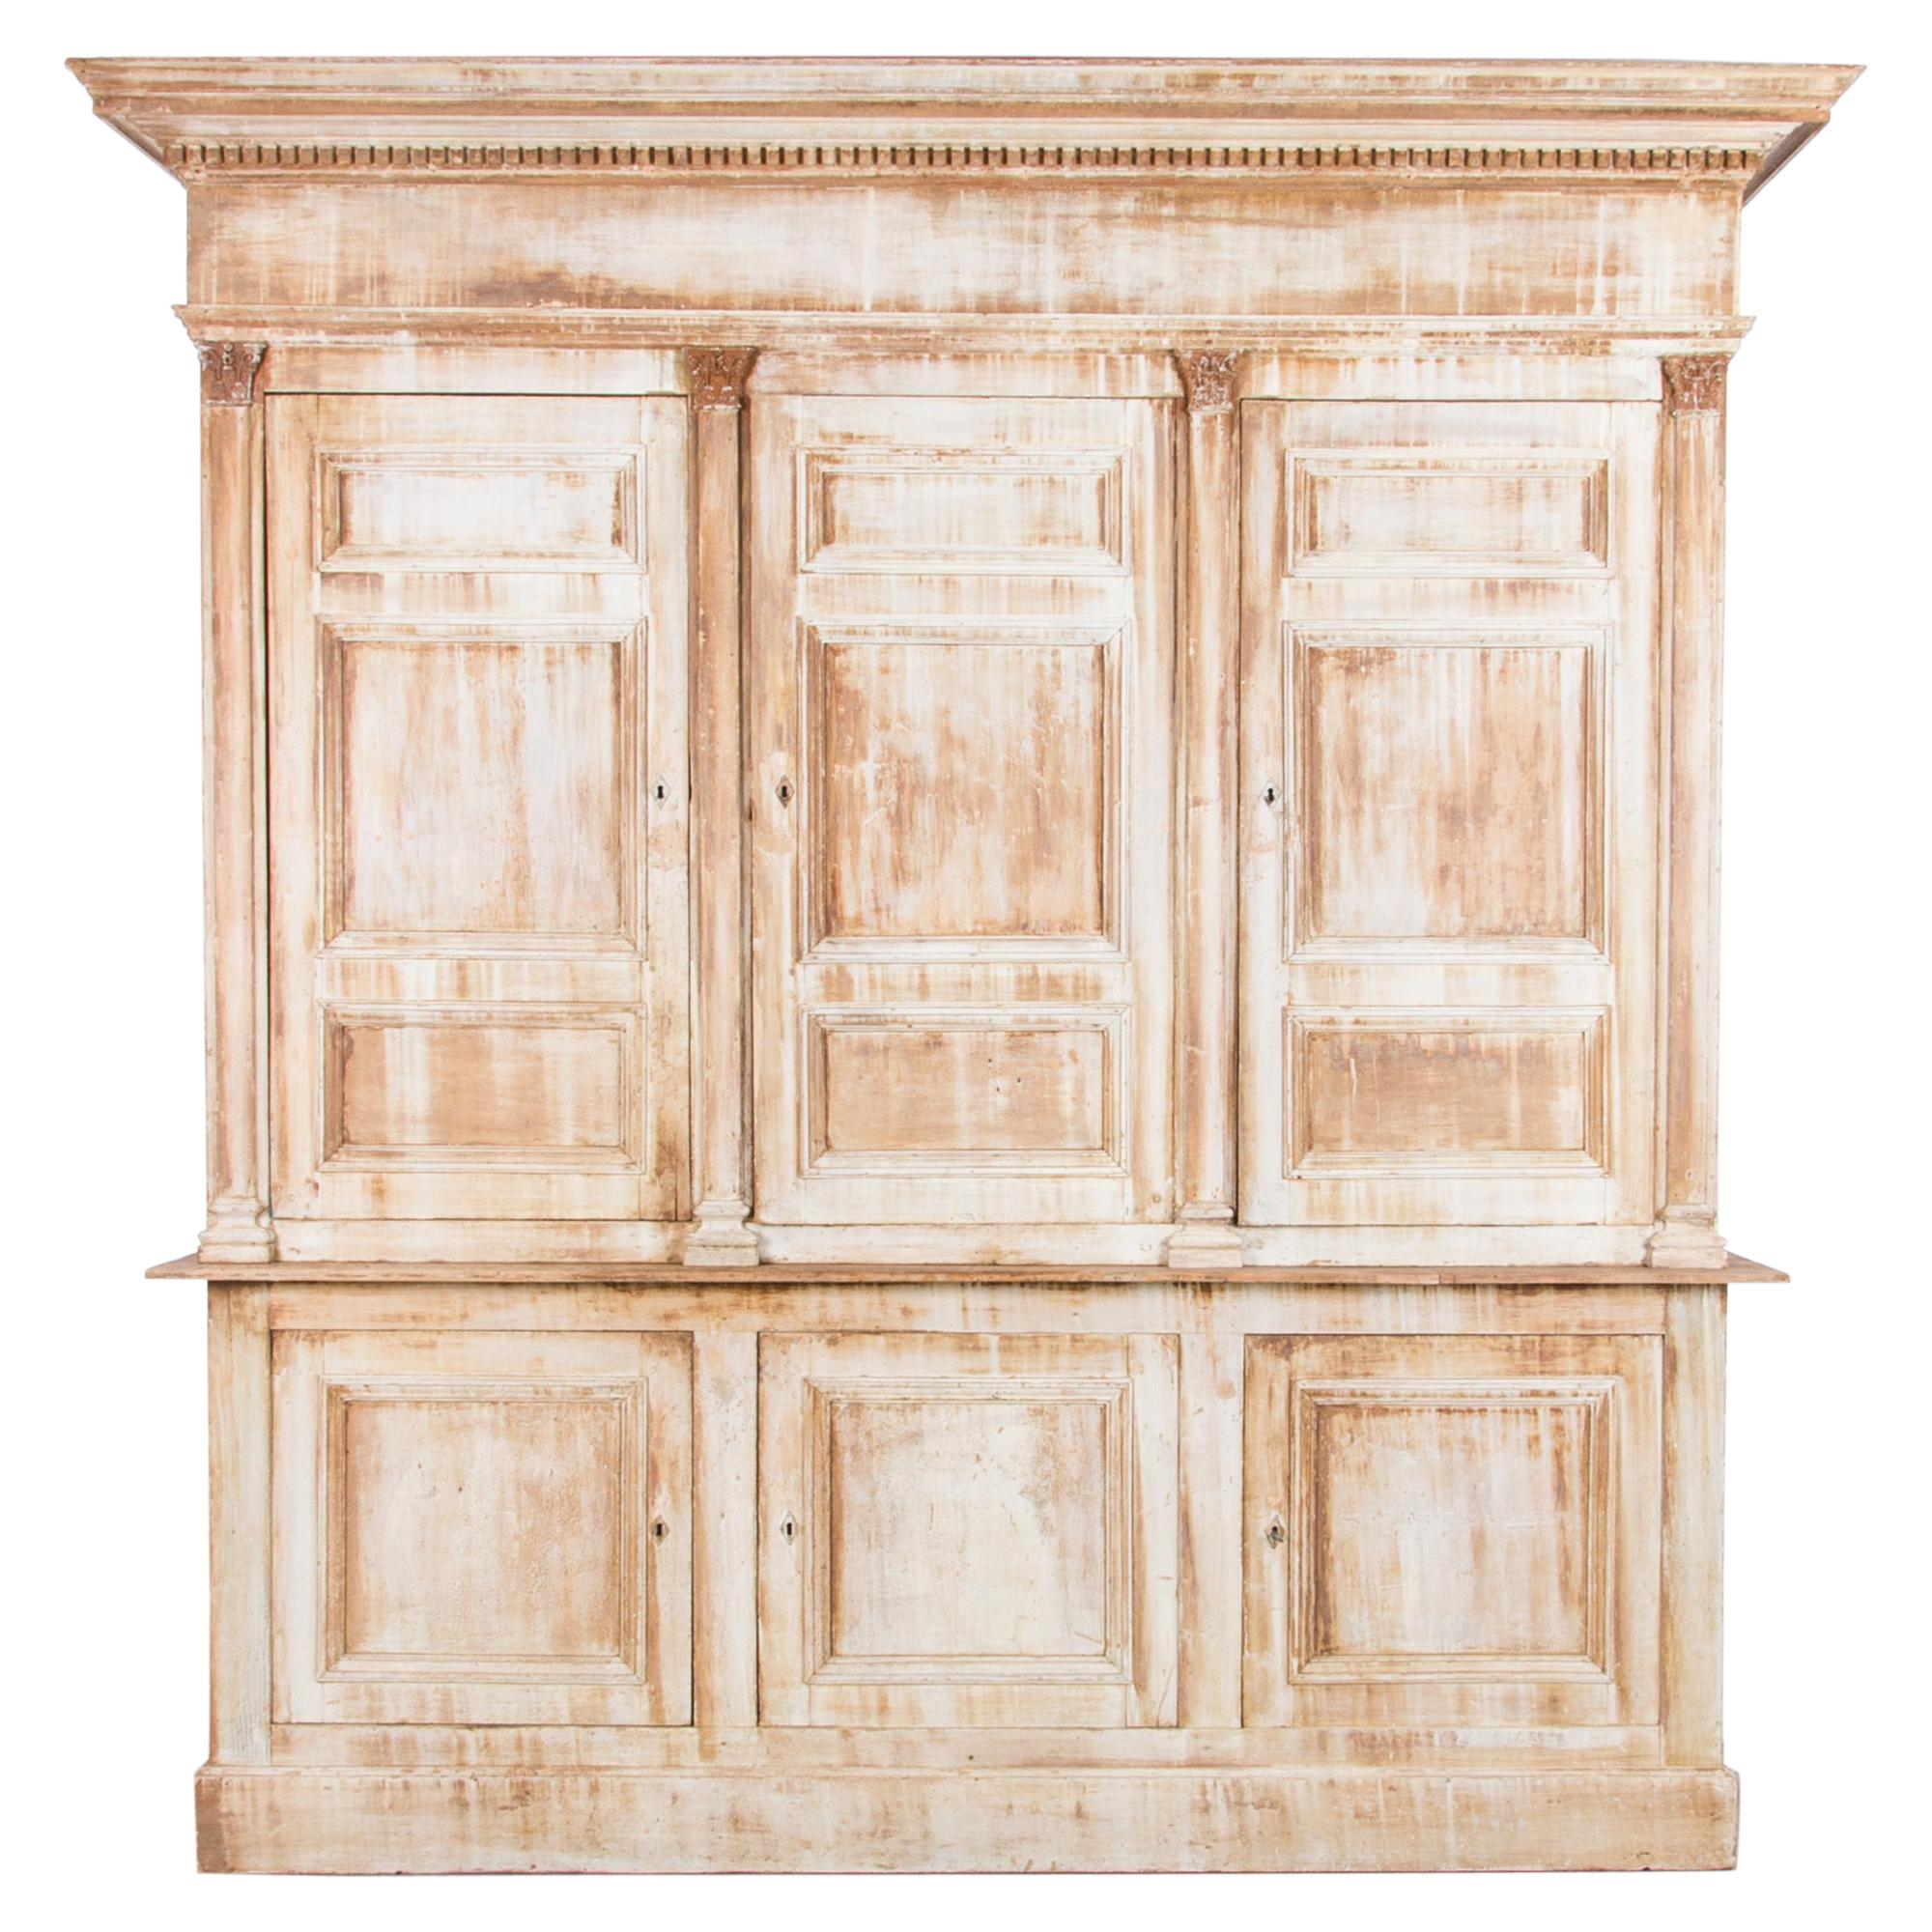 1850s French Neoclassical Wooden Patinated Cabinet